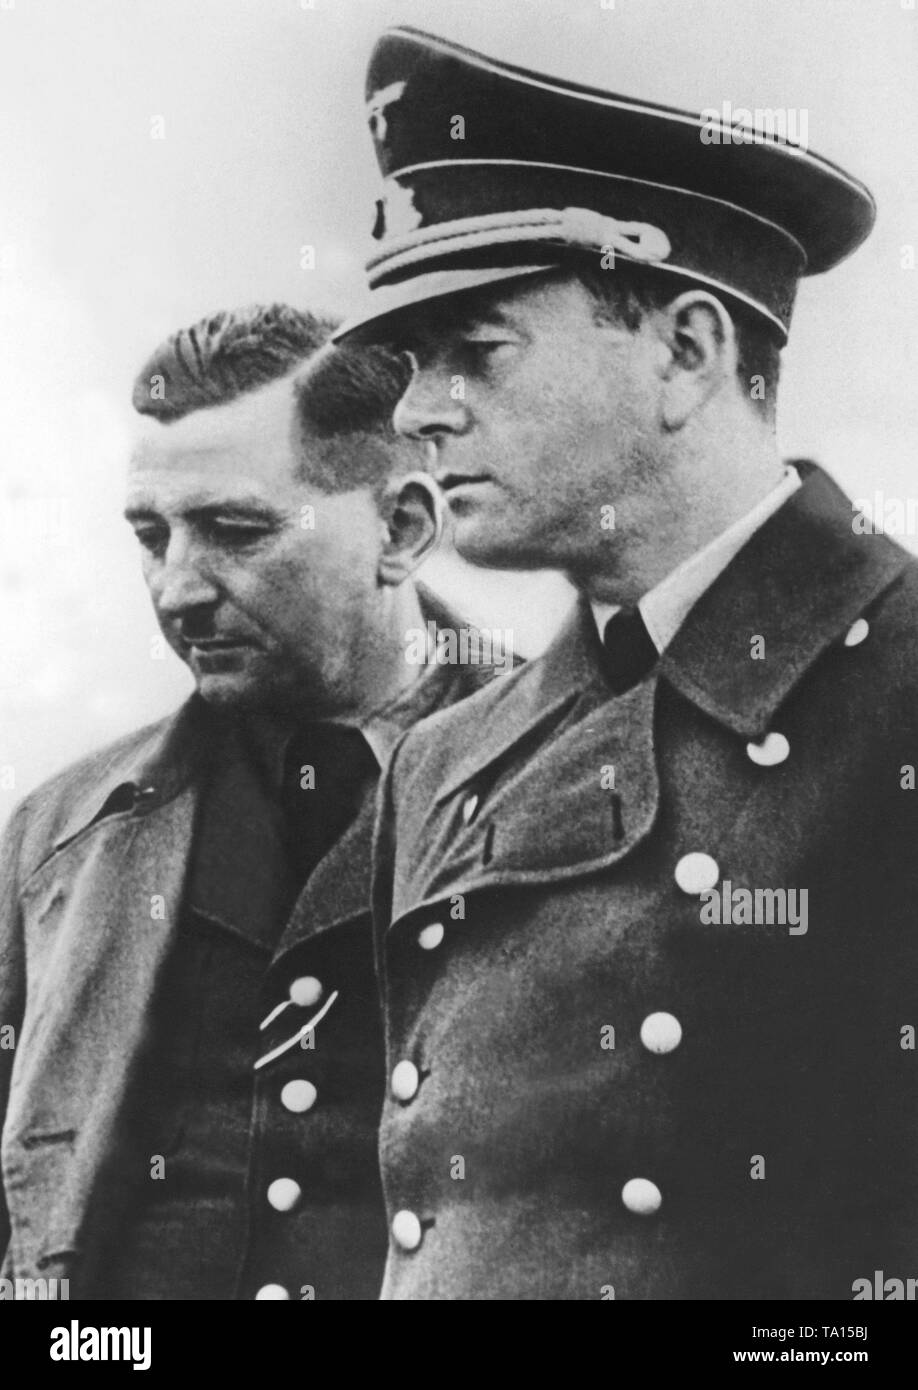 The head of the Organisation Todt Franz Xaver Dorsch visits the Atlantic Wall in France together with his superior Albert Speer. Stock Photo